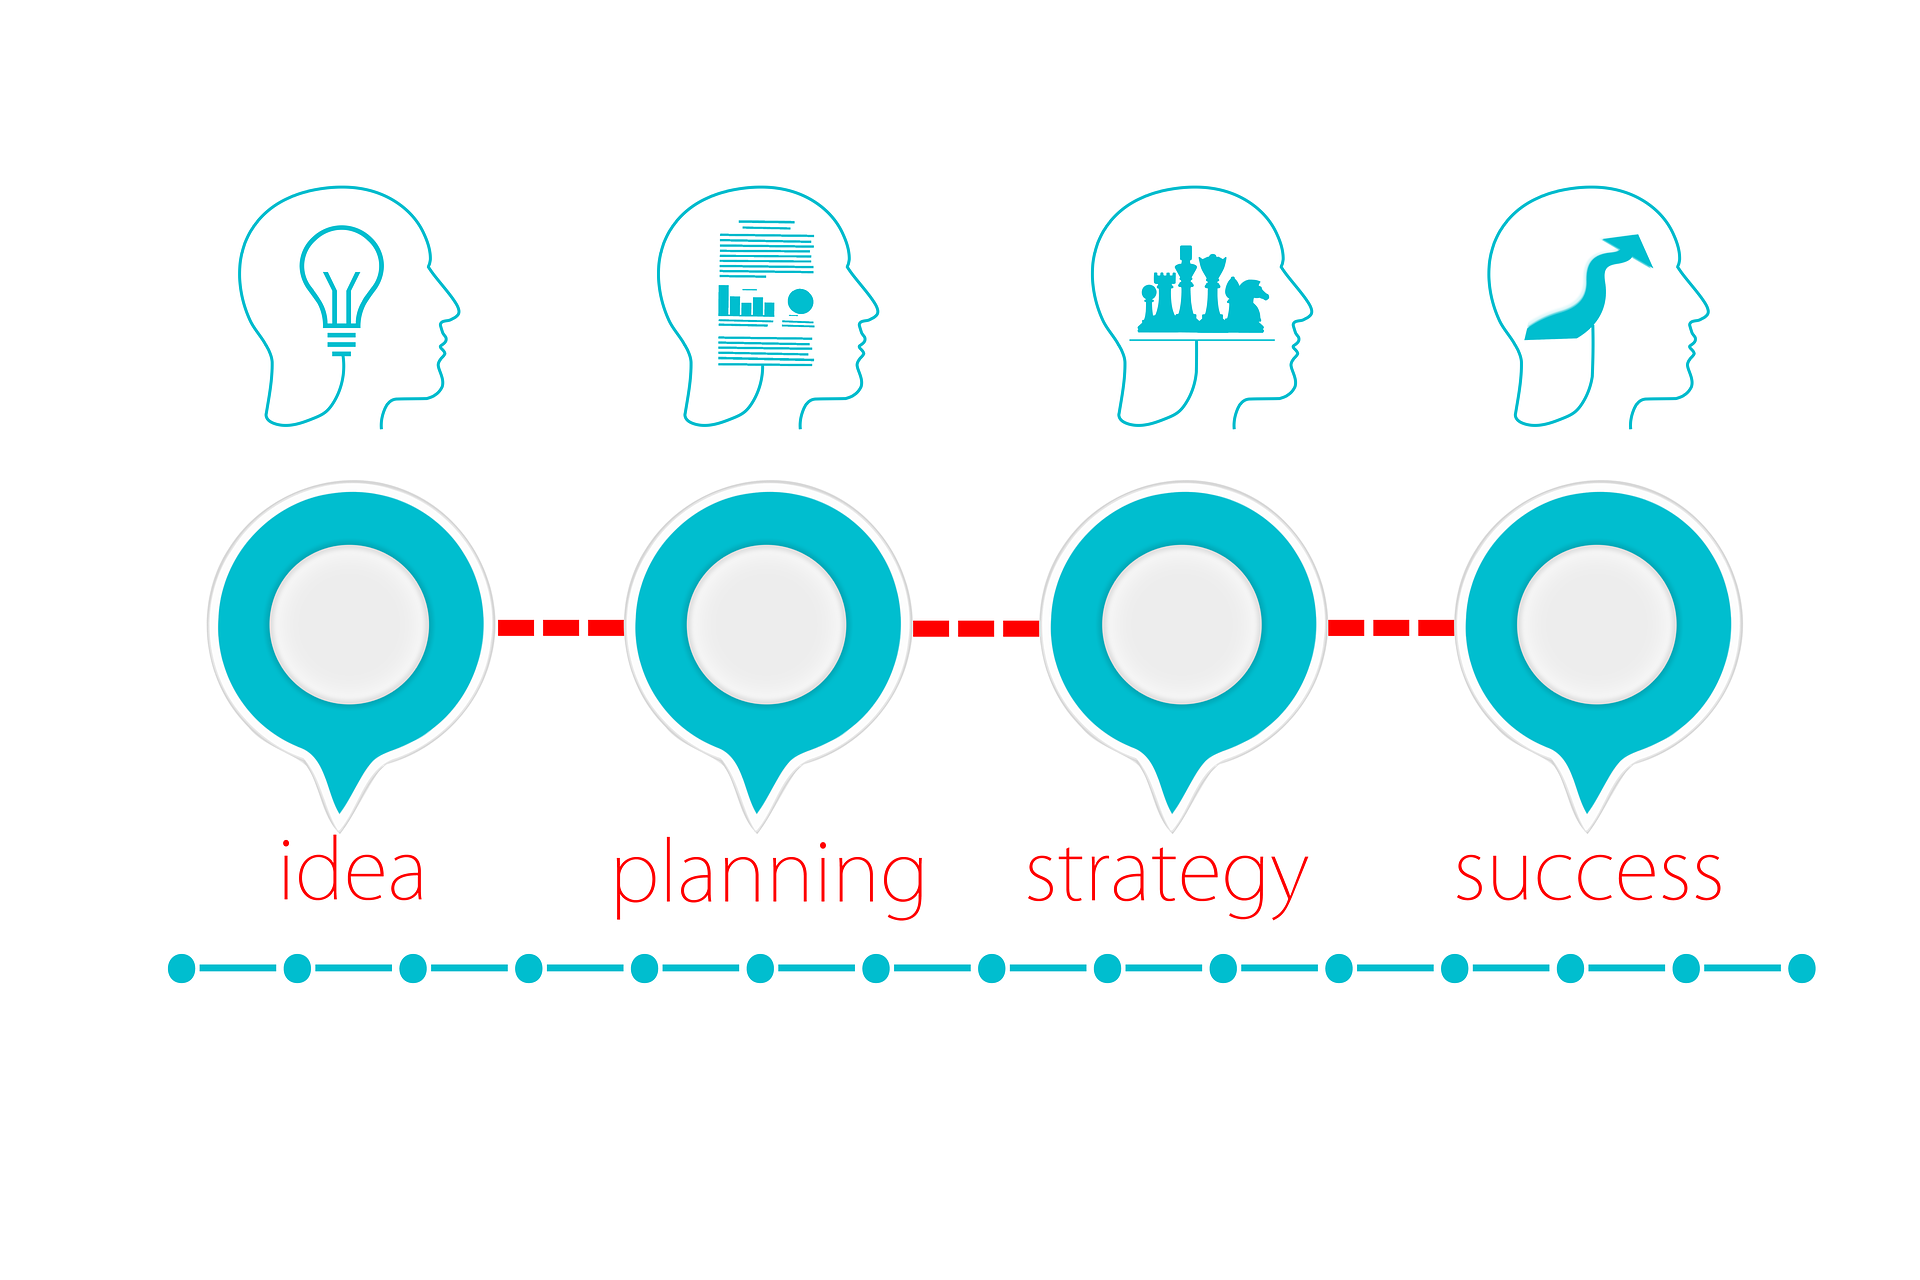 An illustration showing the product cycle from an idea to success, symbolizing all the processes organized in a PDM system.